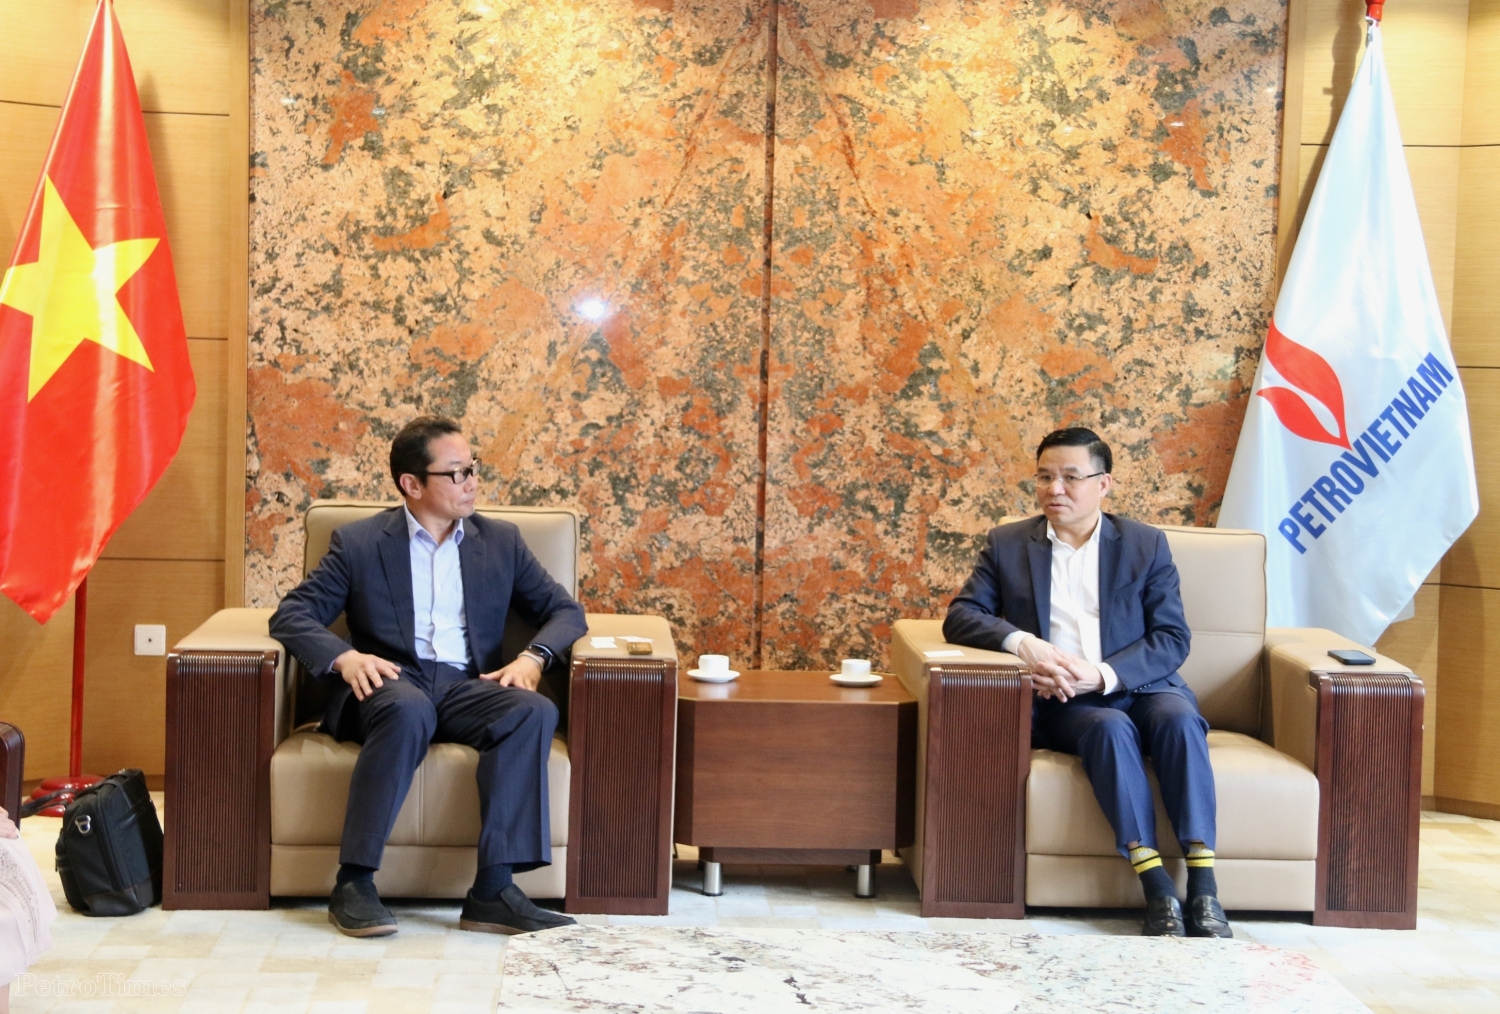 Petrovietnam President and CEO Le Manh Hung receives General Manager of Marubeni Asia Energy and Power Department